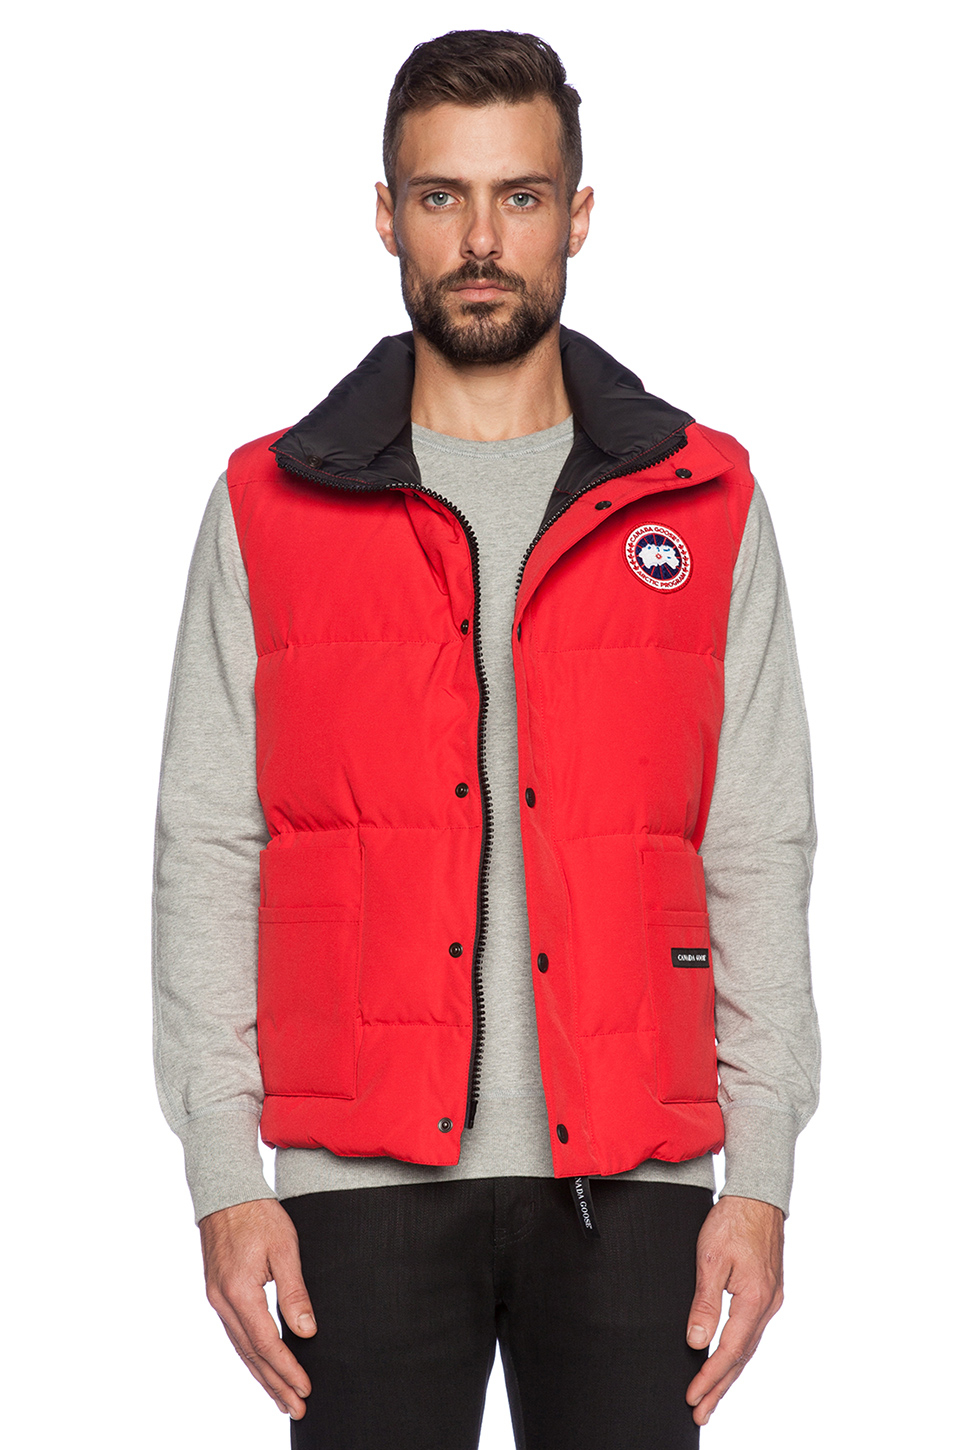 Canada Goose Cotton Freestyle Vest in Red for Men - Lyst